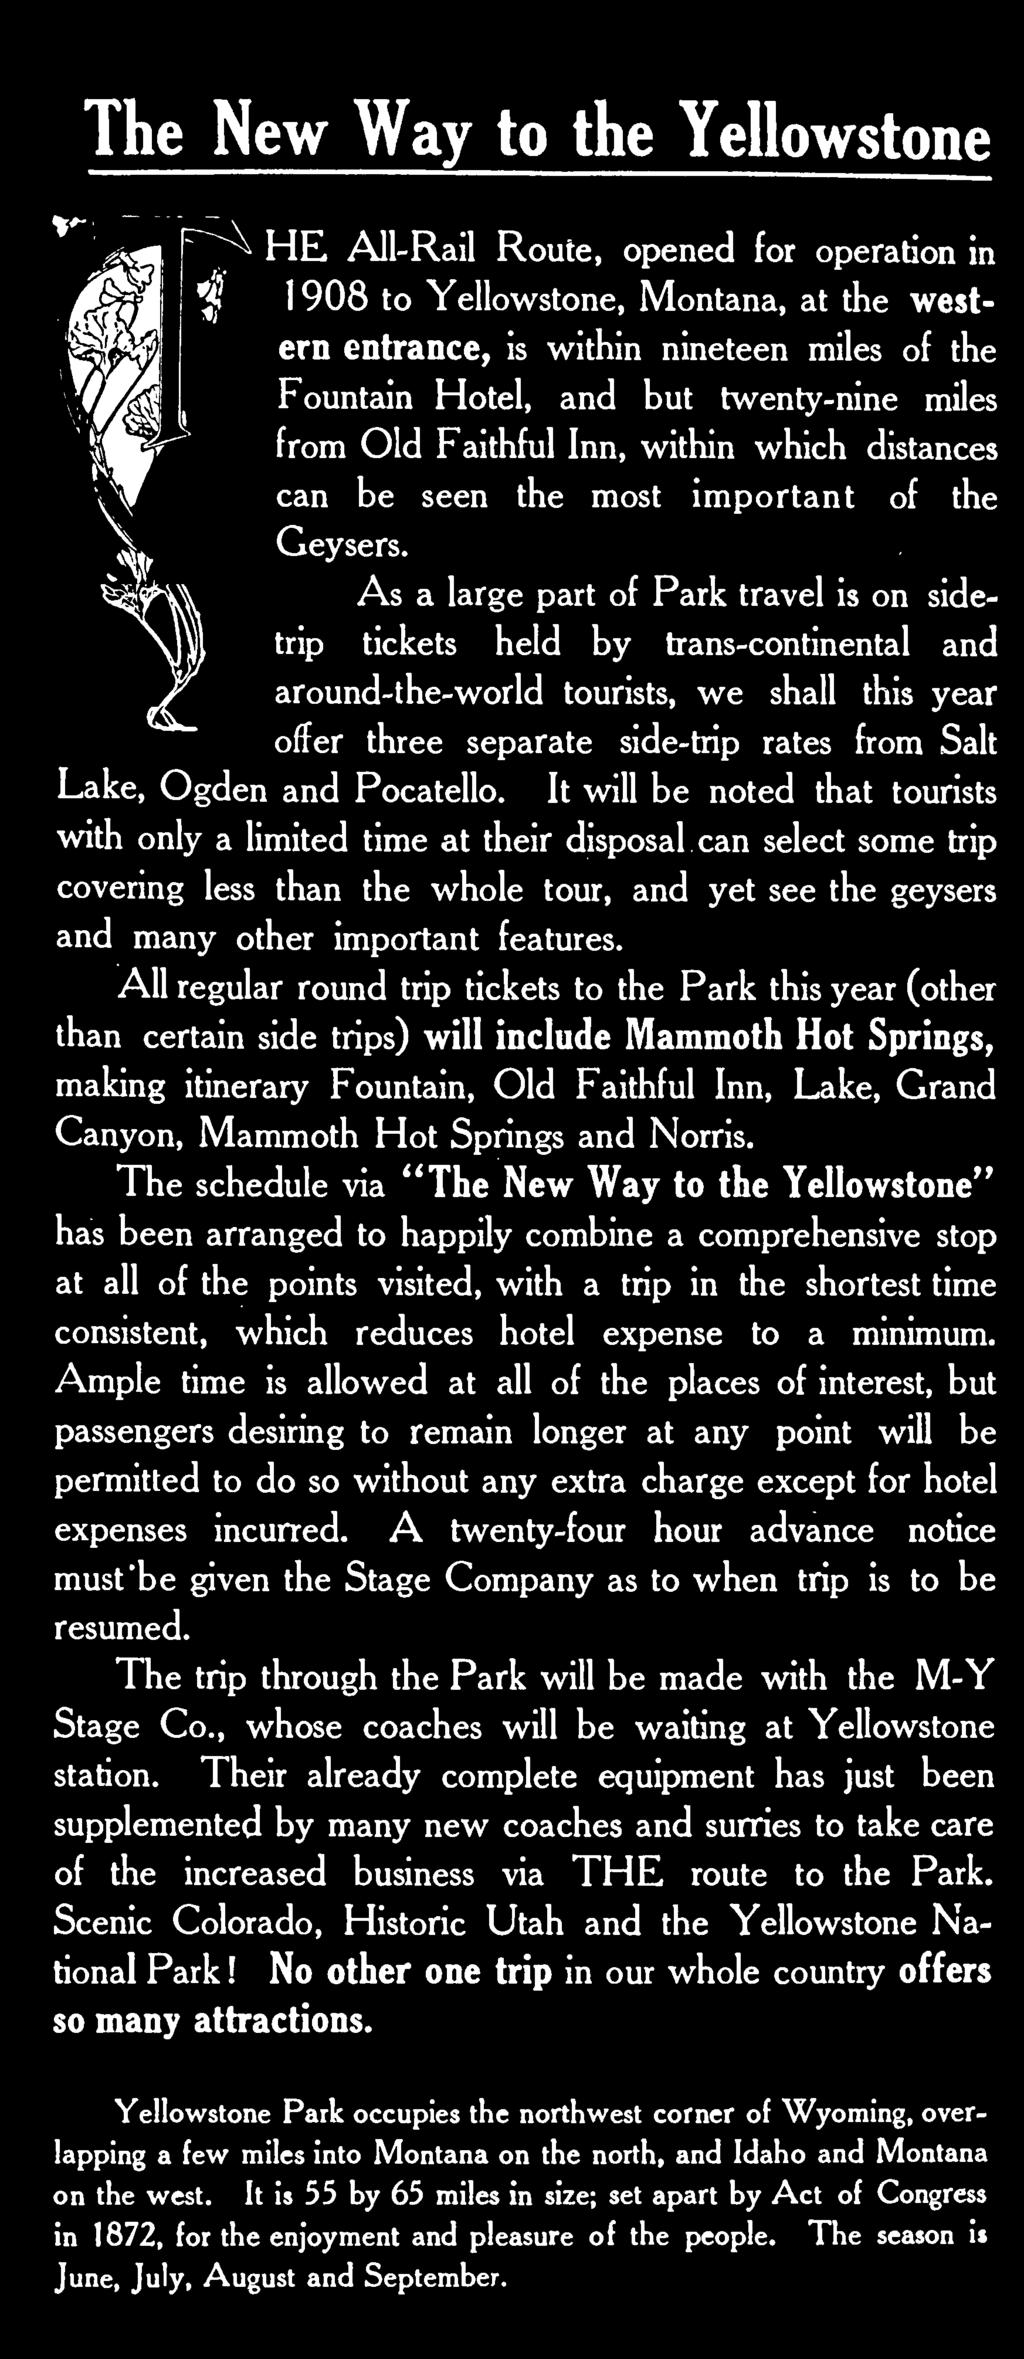 than All regular round trip tickets to the Park this year (other certain side trips) will include Mammoth Hot Springs, making itinerary Fountain, Old Faithful Inn, Lake, Grand Canyon, Mammoth Hot